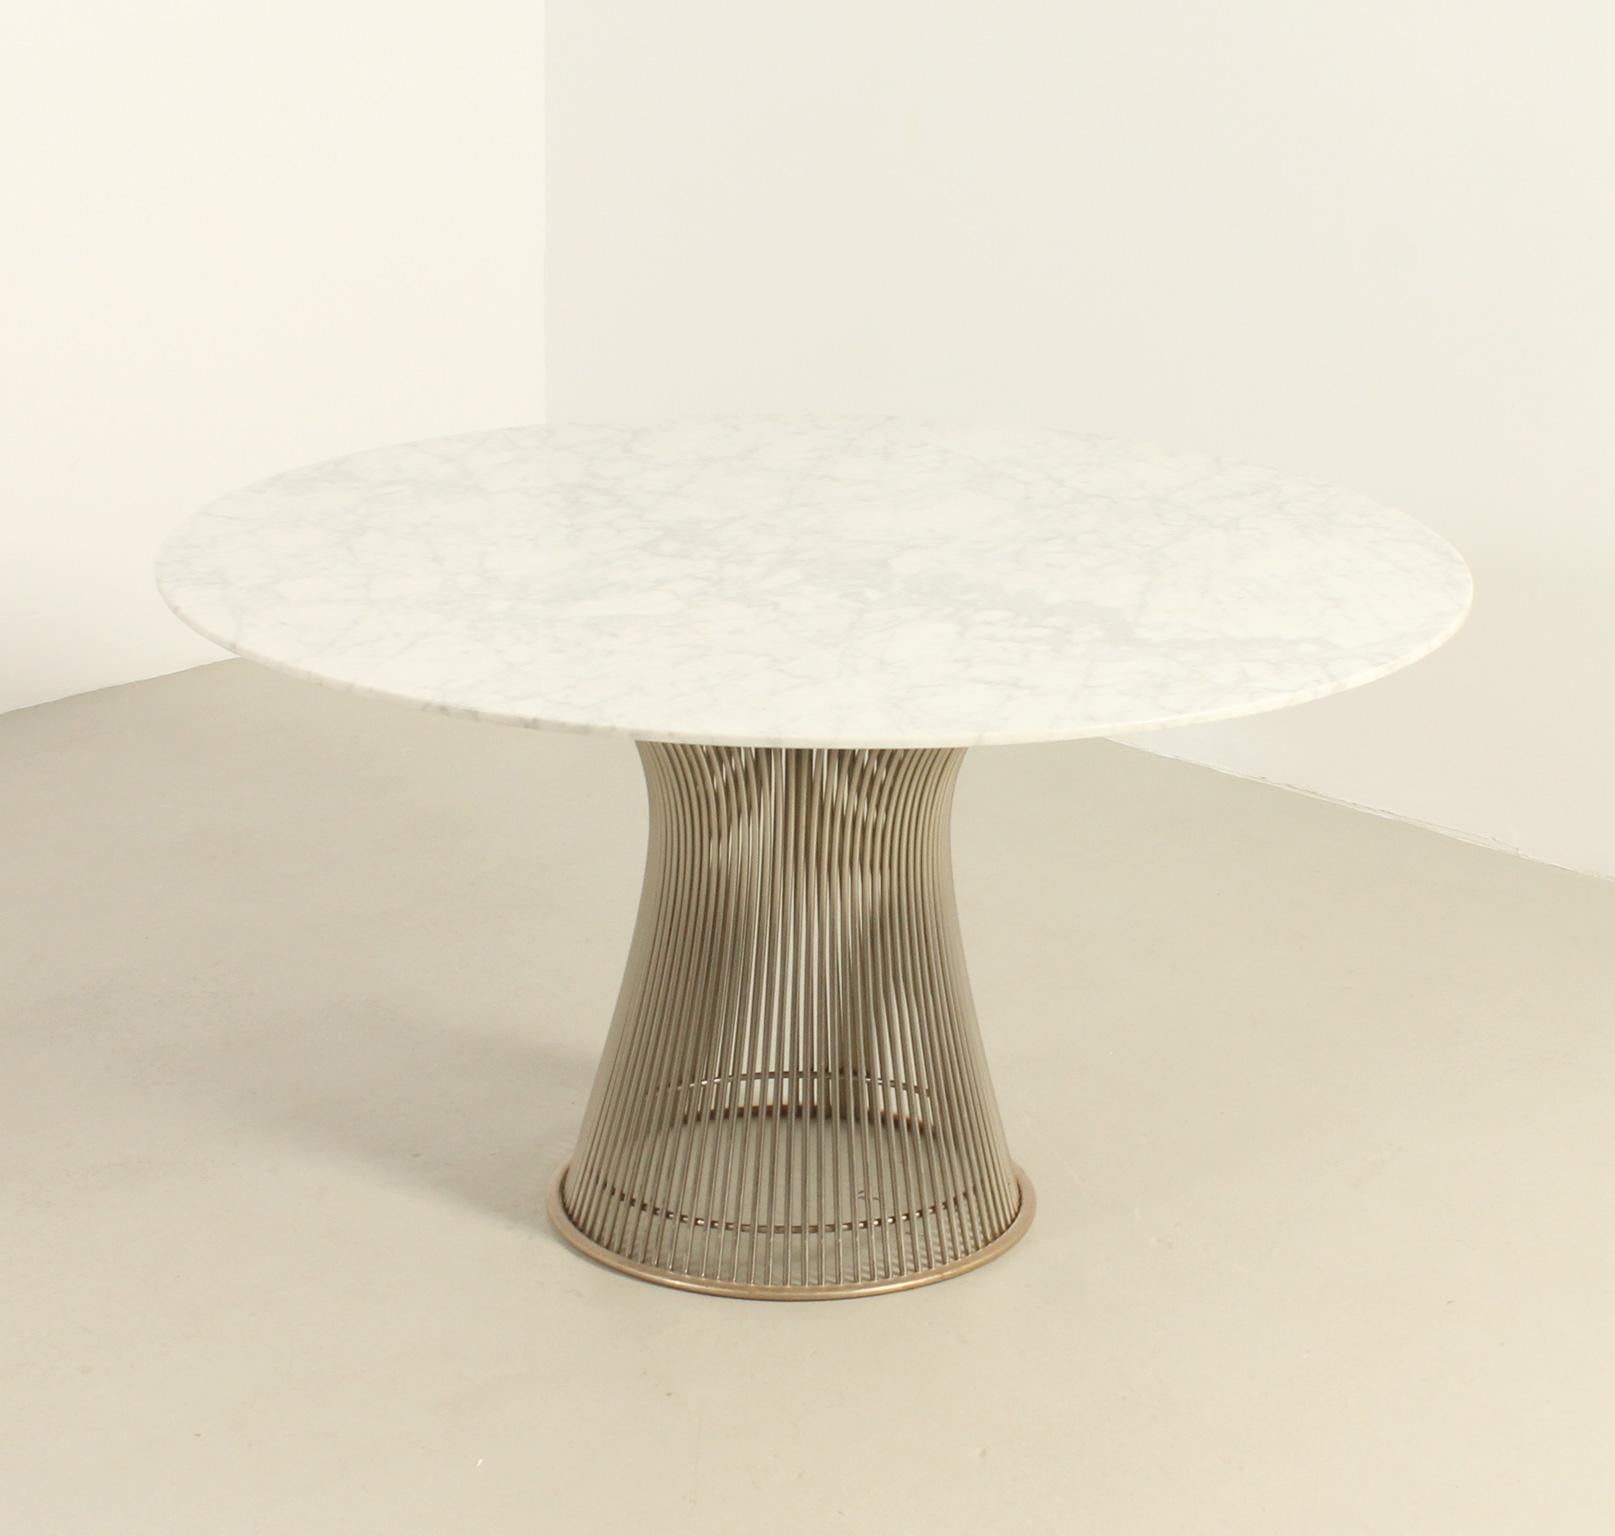 Marble dining table designed by Warren Platner for Knoll, USA, 1966. Calacatta marble top and polished nickel steel base. 